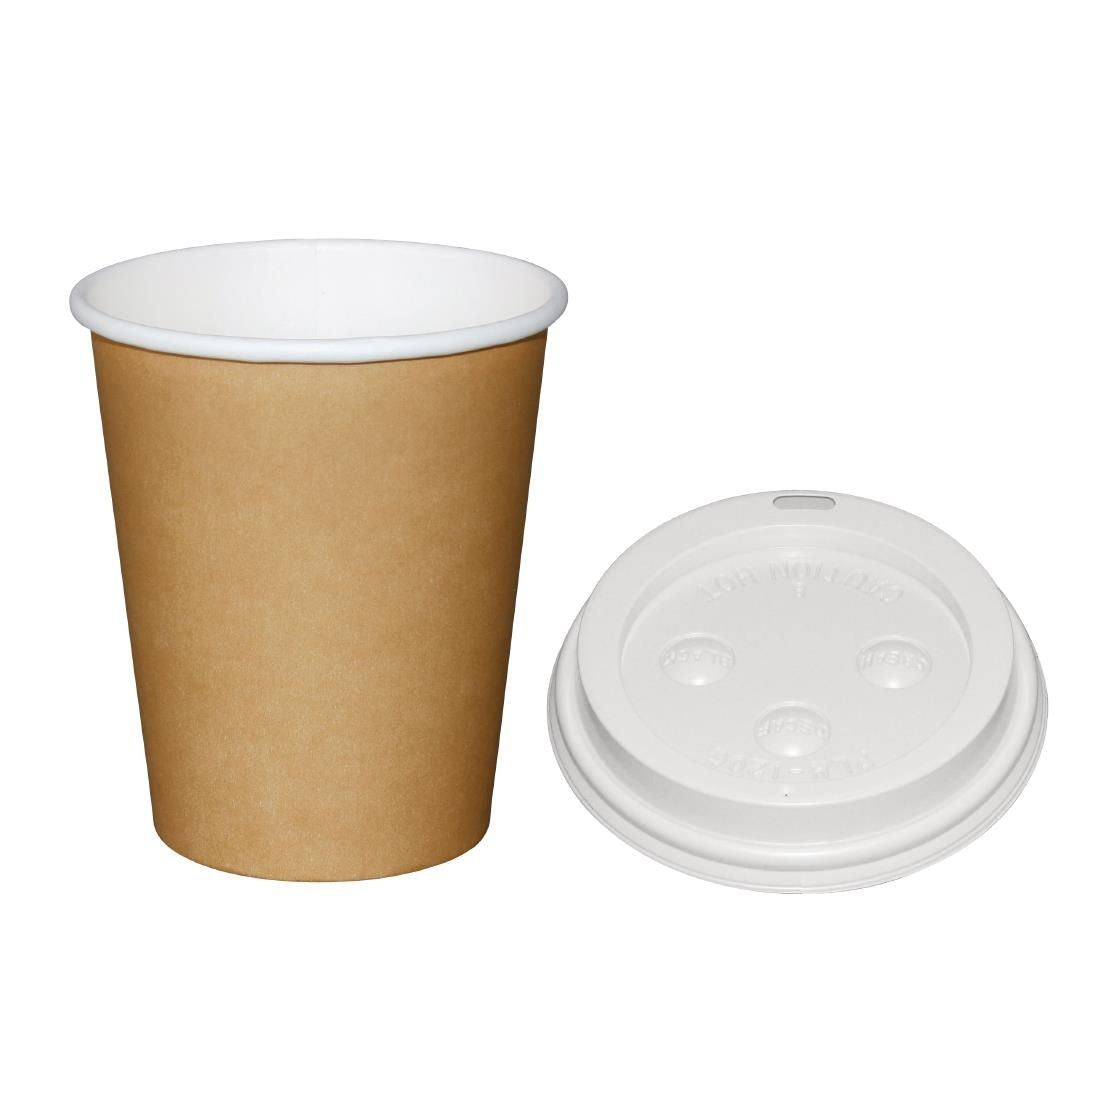 Special Offer  Fiesta Brown 225ml Hot Cups and White Lids (Pack of 1000) - SA434 Disposable Cups Fiesta   